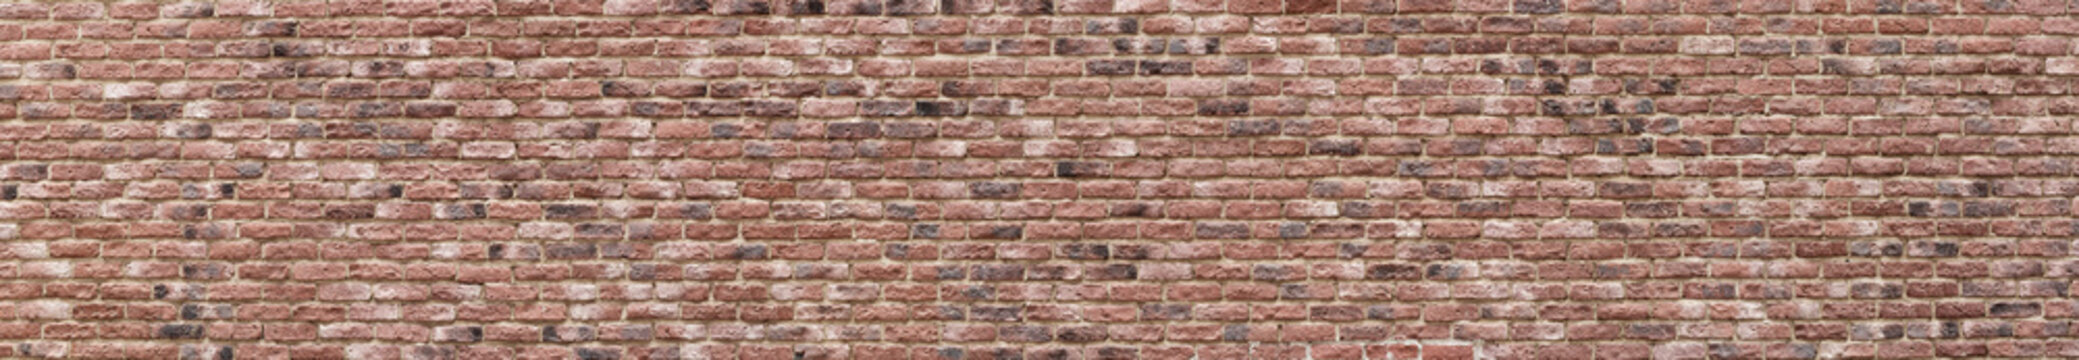 Panoramic high resolution vintage pink, black and red brick wall background texture. Architecture grunge detail abstract theme. Home, office or loft design backdrop style.